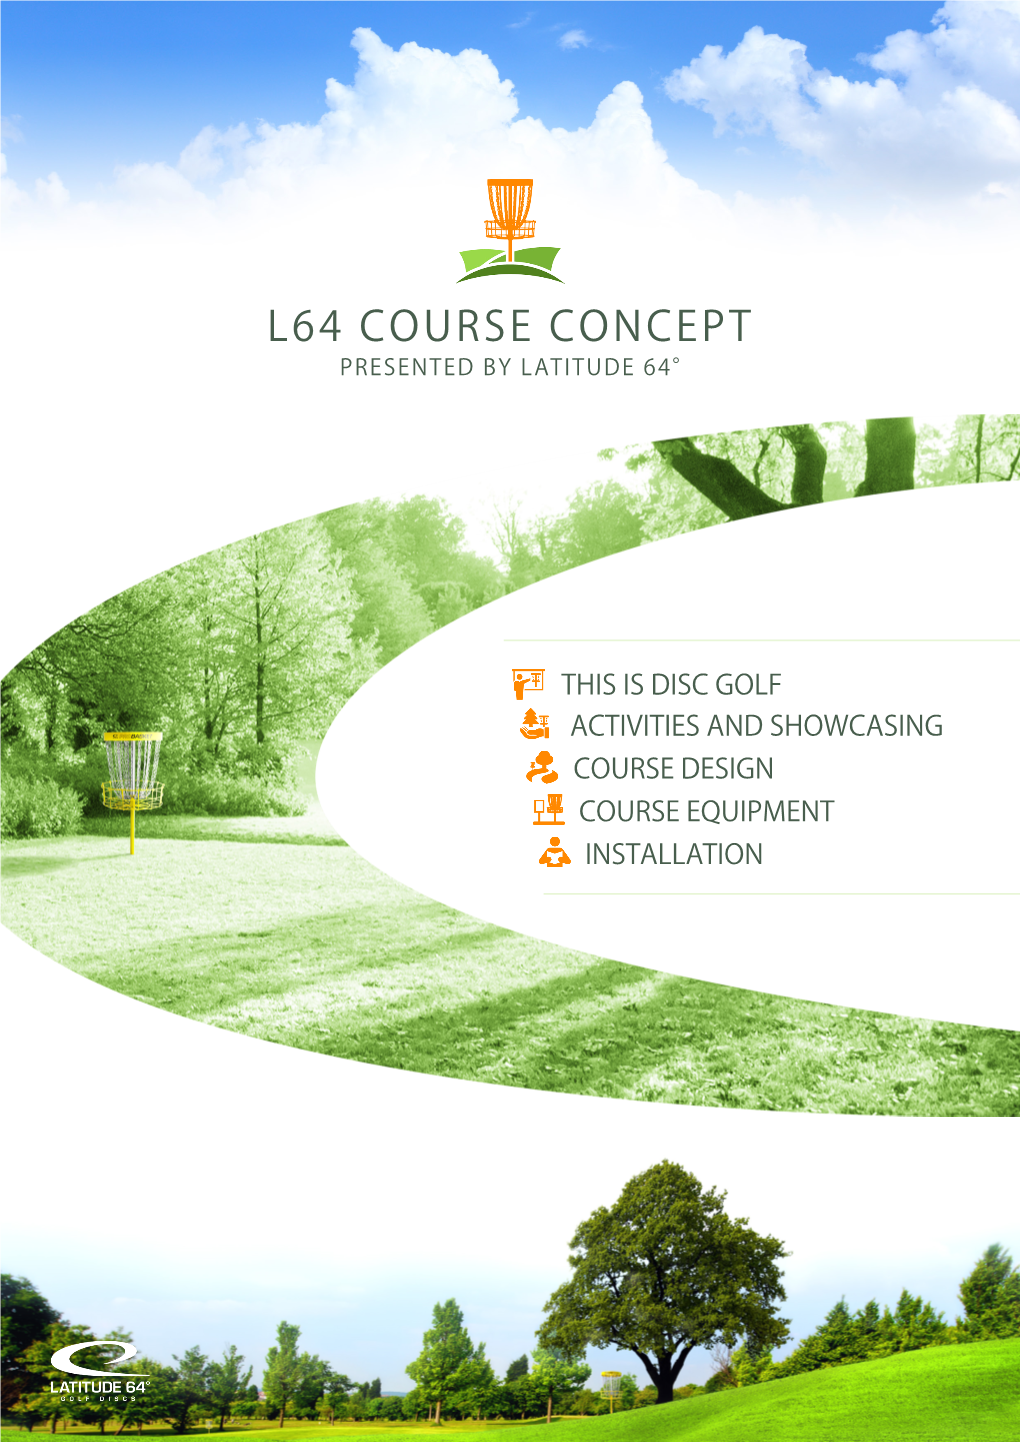 Course Concept Presented by Latitude 64°